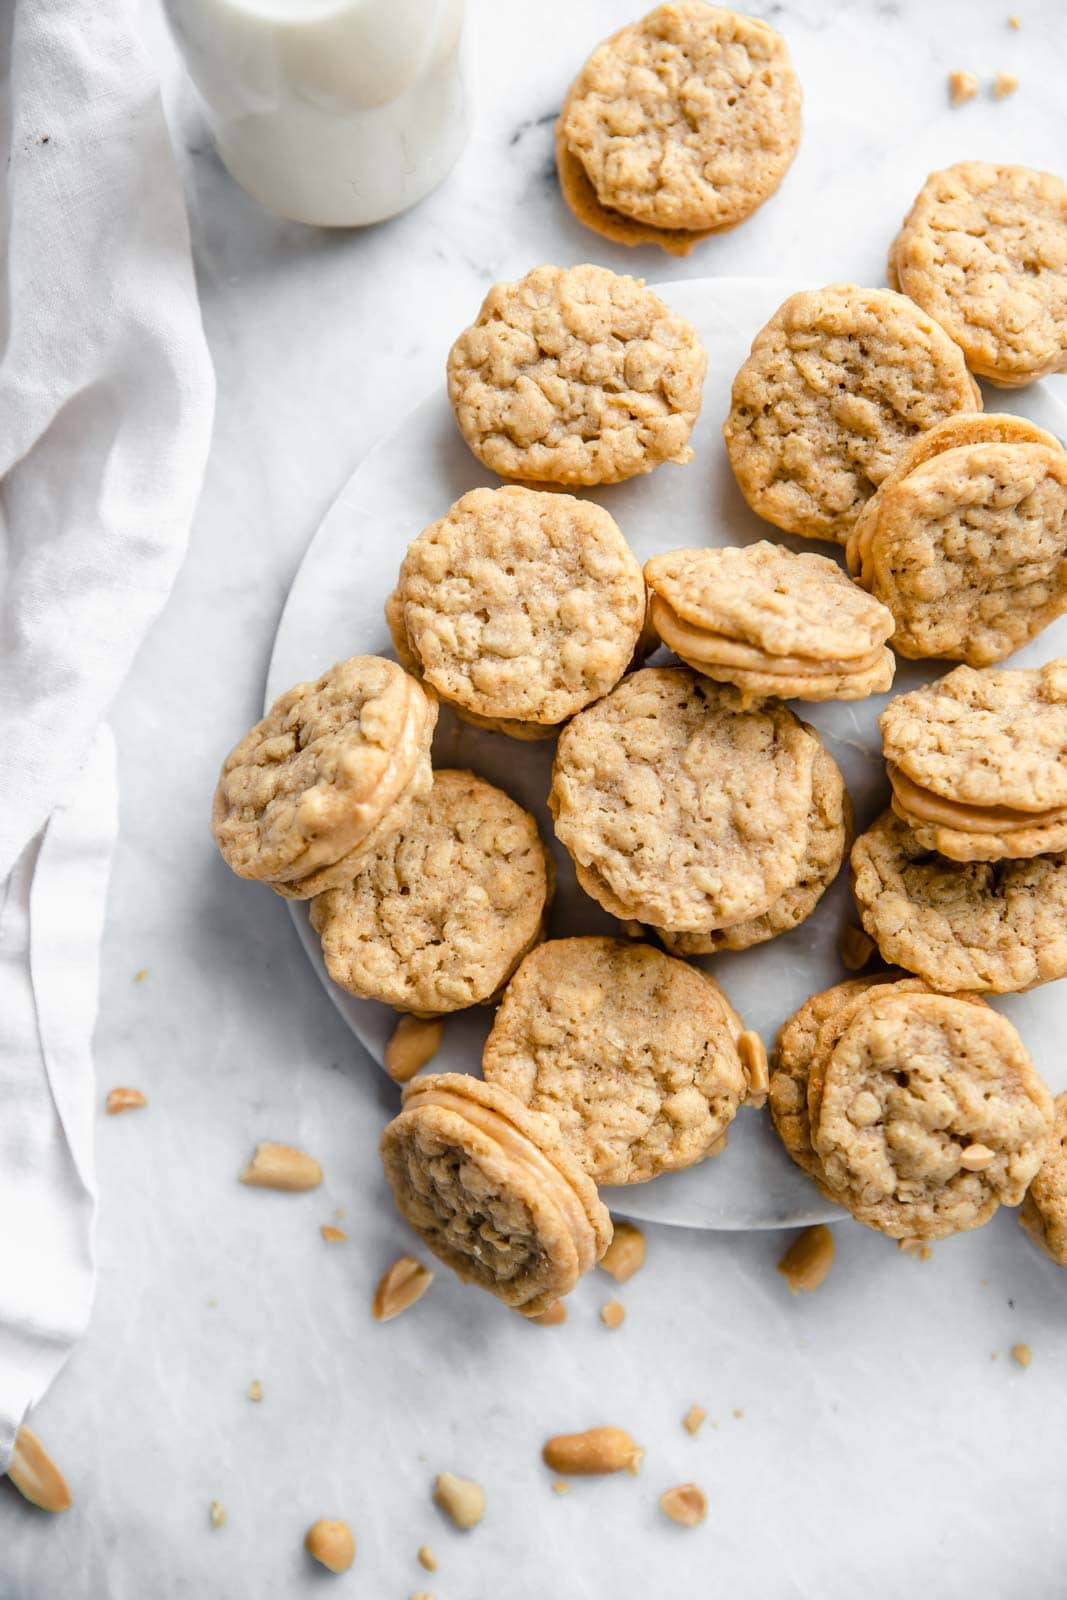 Halfway to Heaven Peanut Butter Cookies: this recipe is nearly all in halves, which makes it super easy to remember. And they're beyond heavenly!